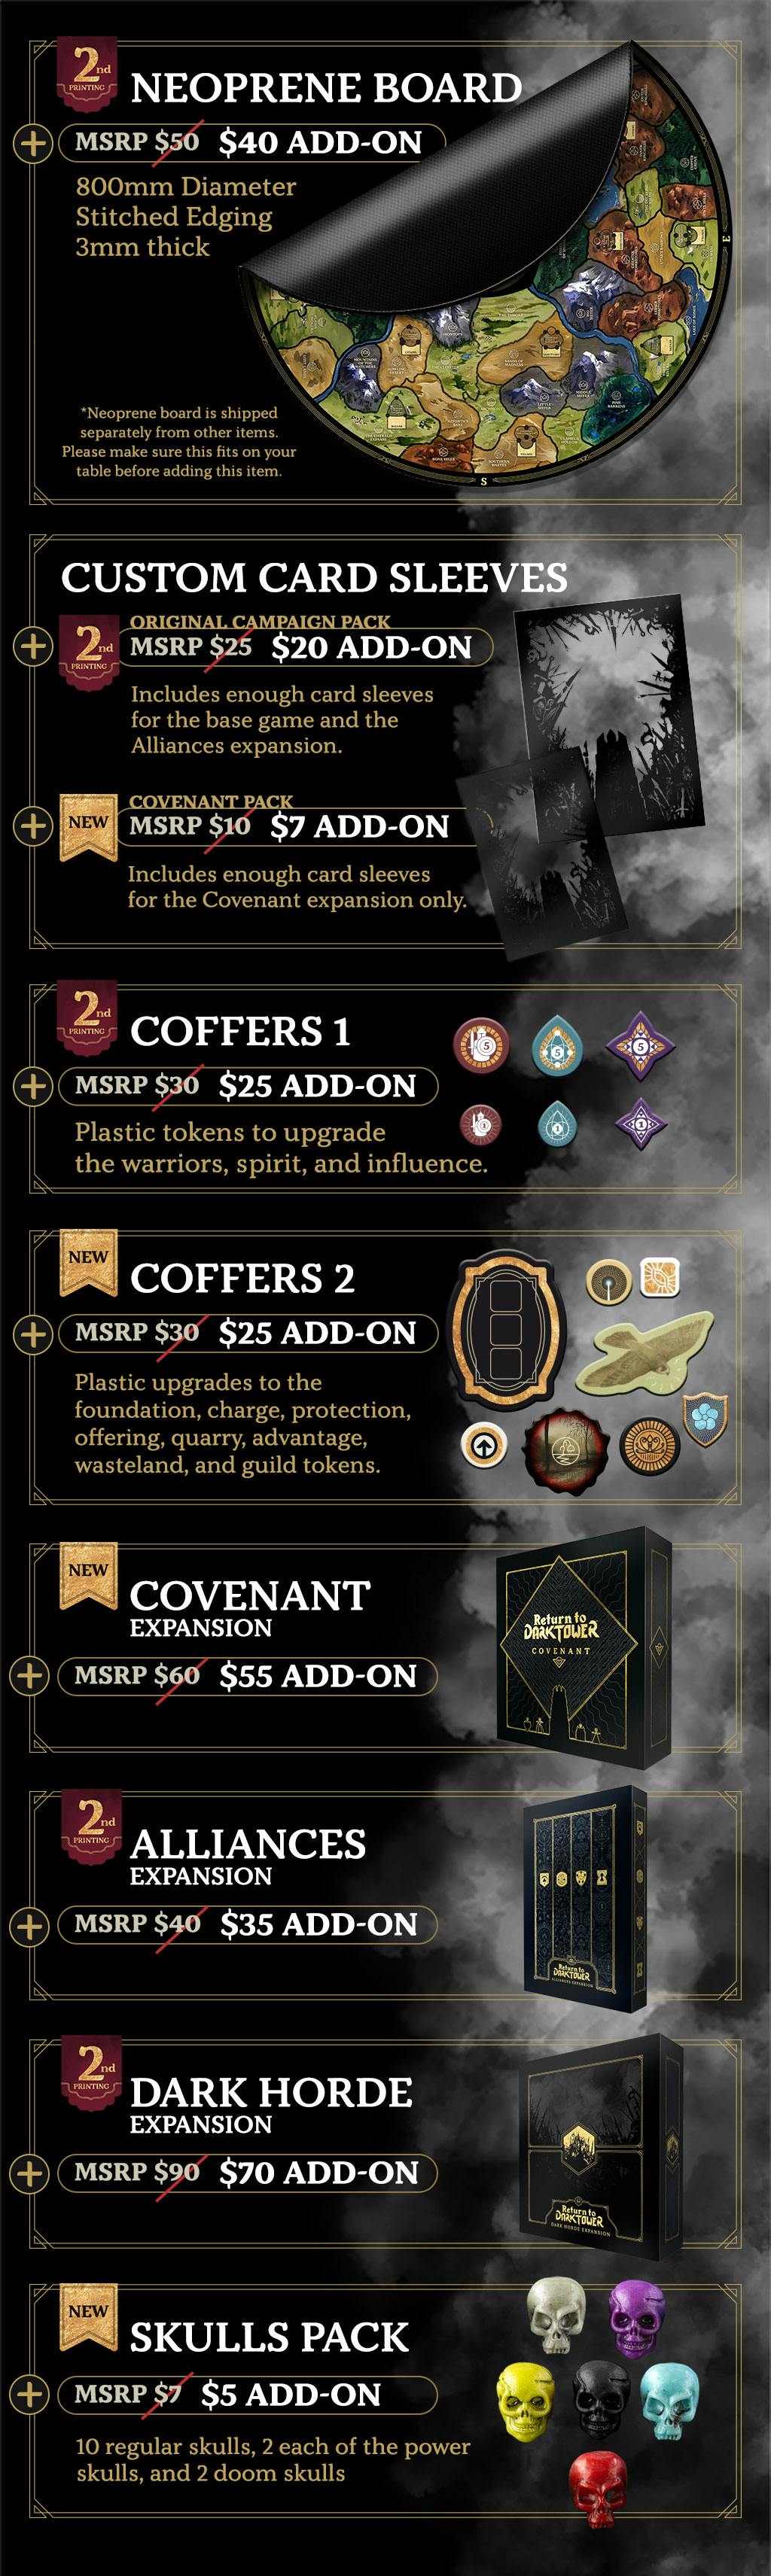 Add ons graphic listing what's available: neoprene playmat, custom card sleeve packs, two different plastic token packs called "coffers" that upgrade the card board tokens in the game, alliances, covenant, and dark horde, and a skull pack